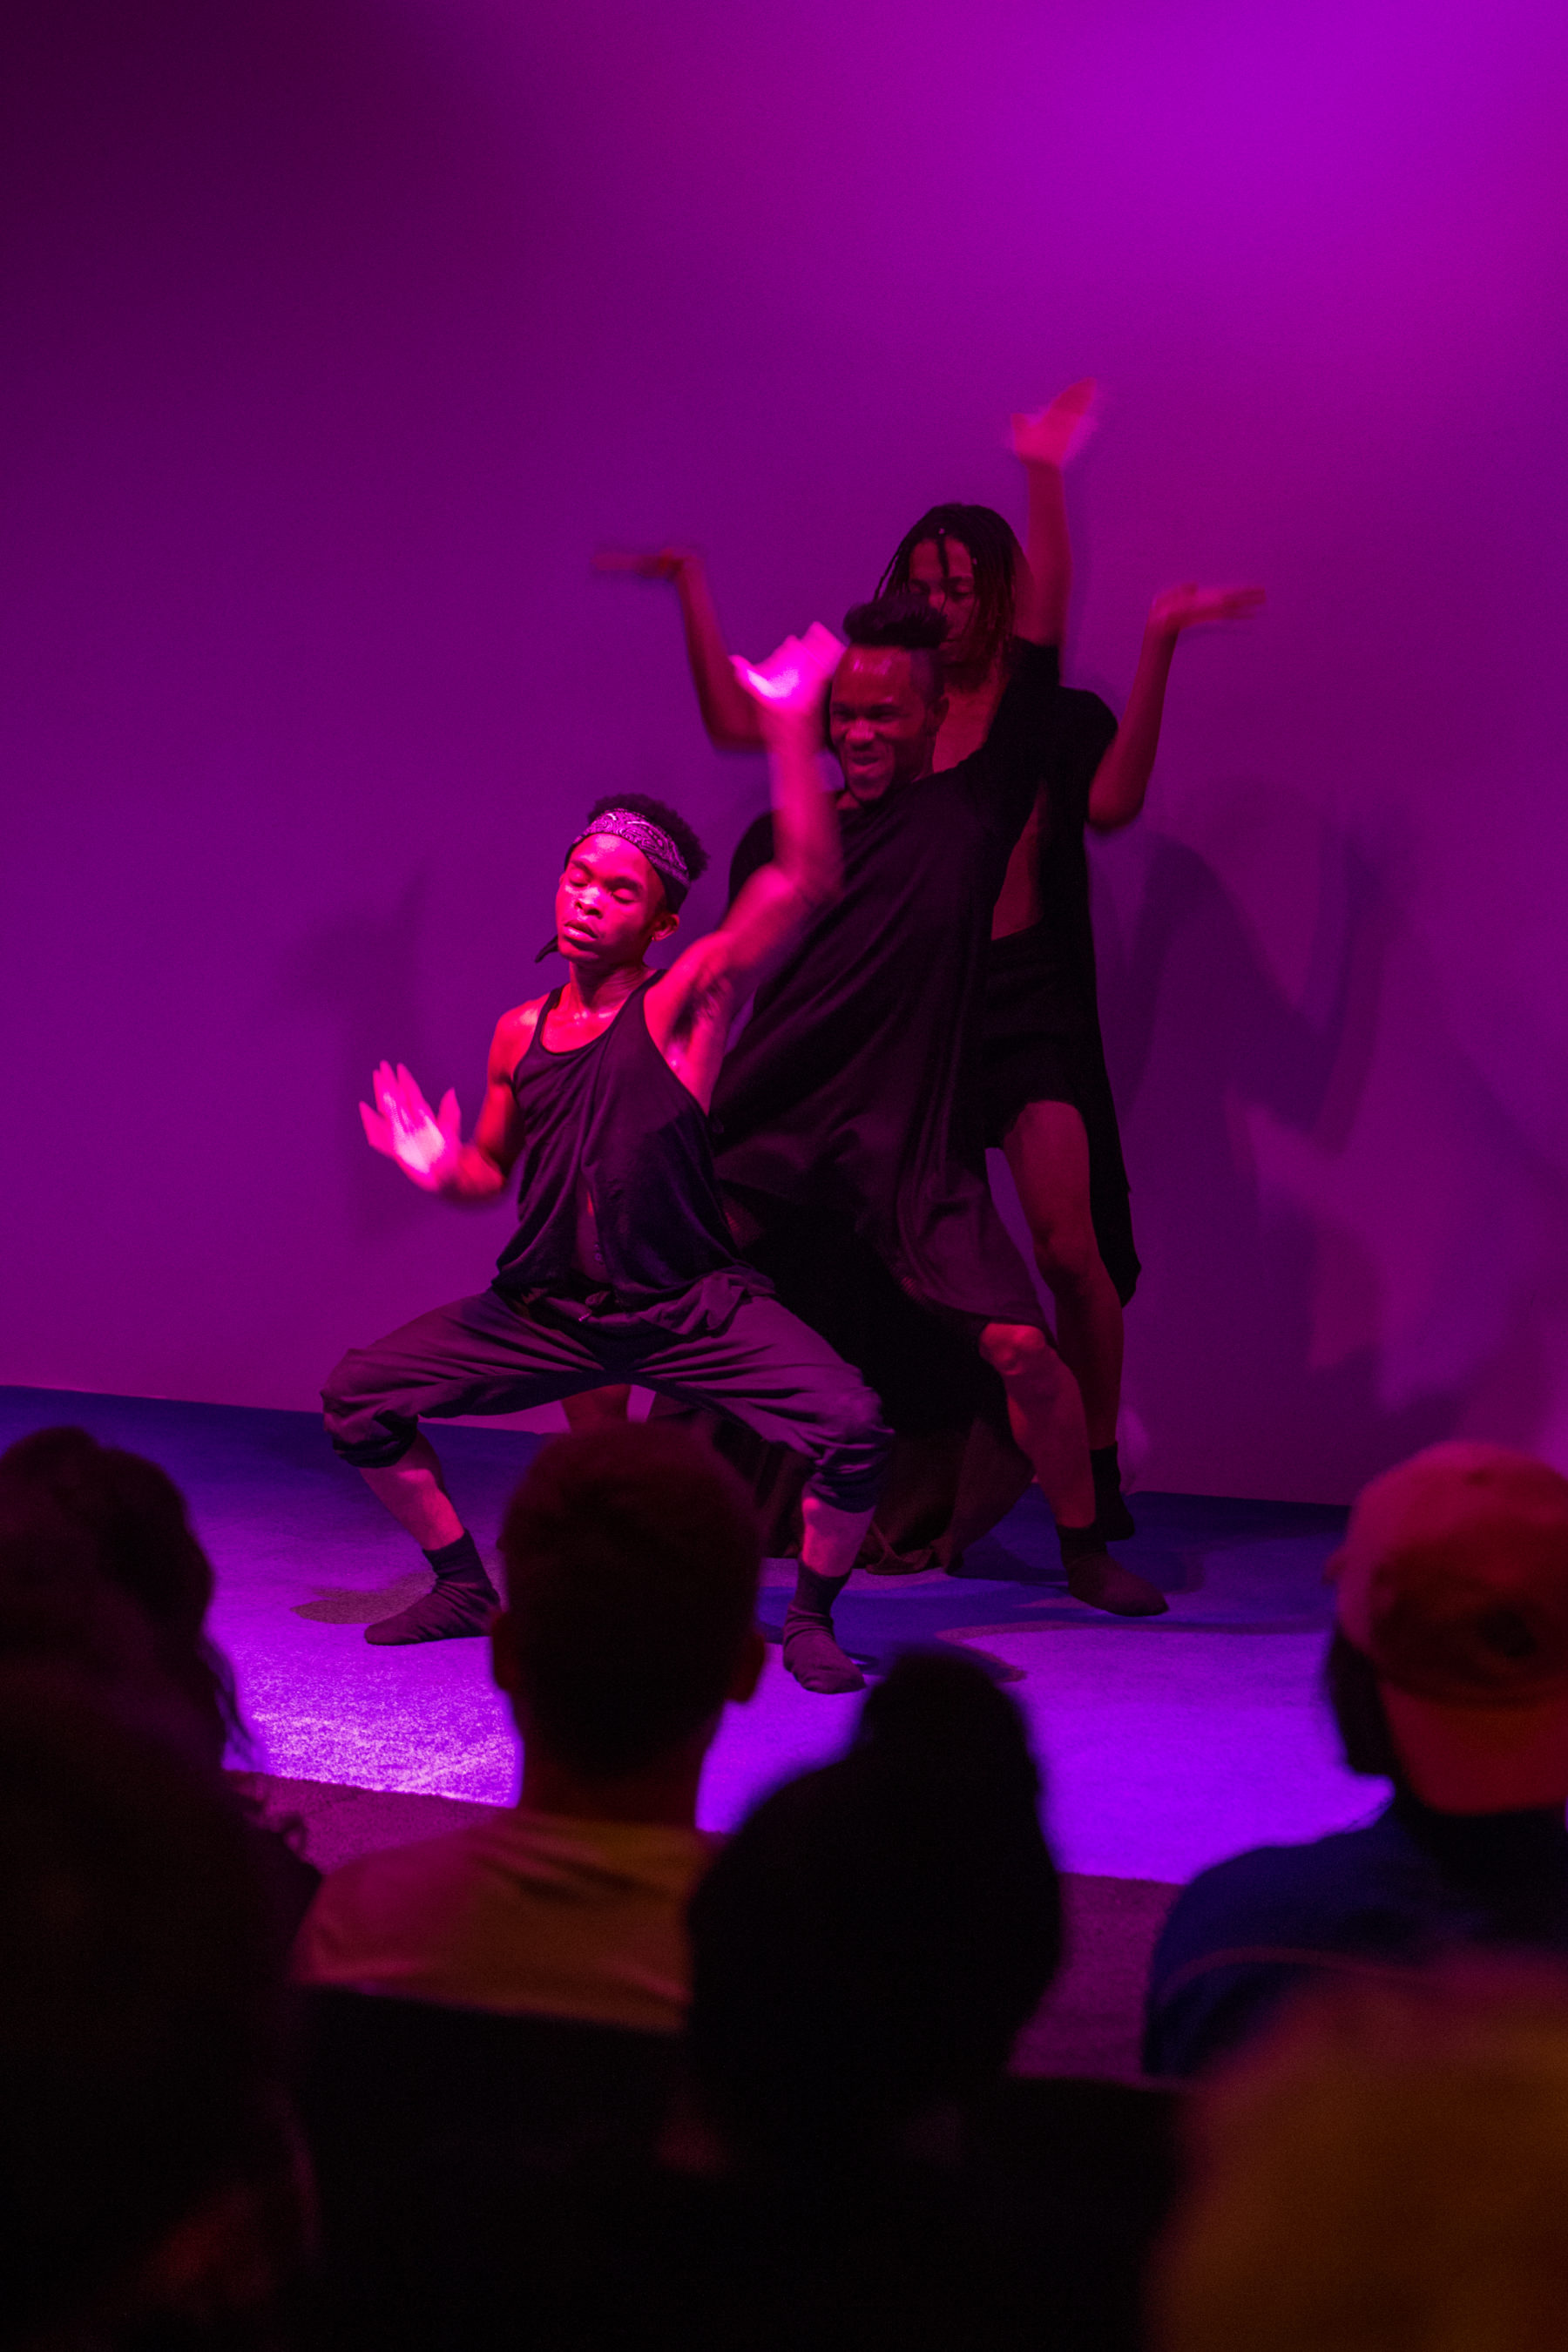 Three performers pose in a line, the performer in the front squats with his hands raised. Toward the bottom of the image we get a glimpse of audience members' heads